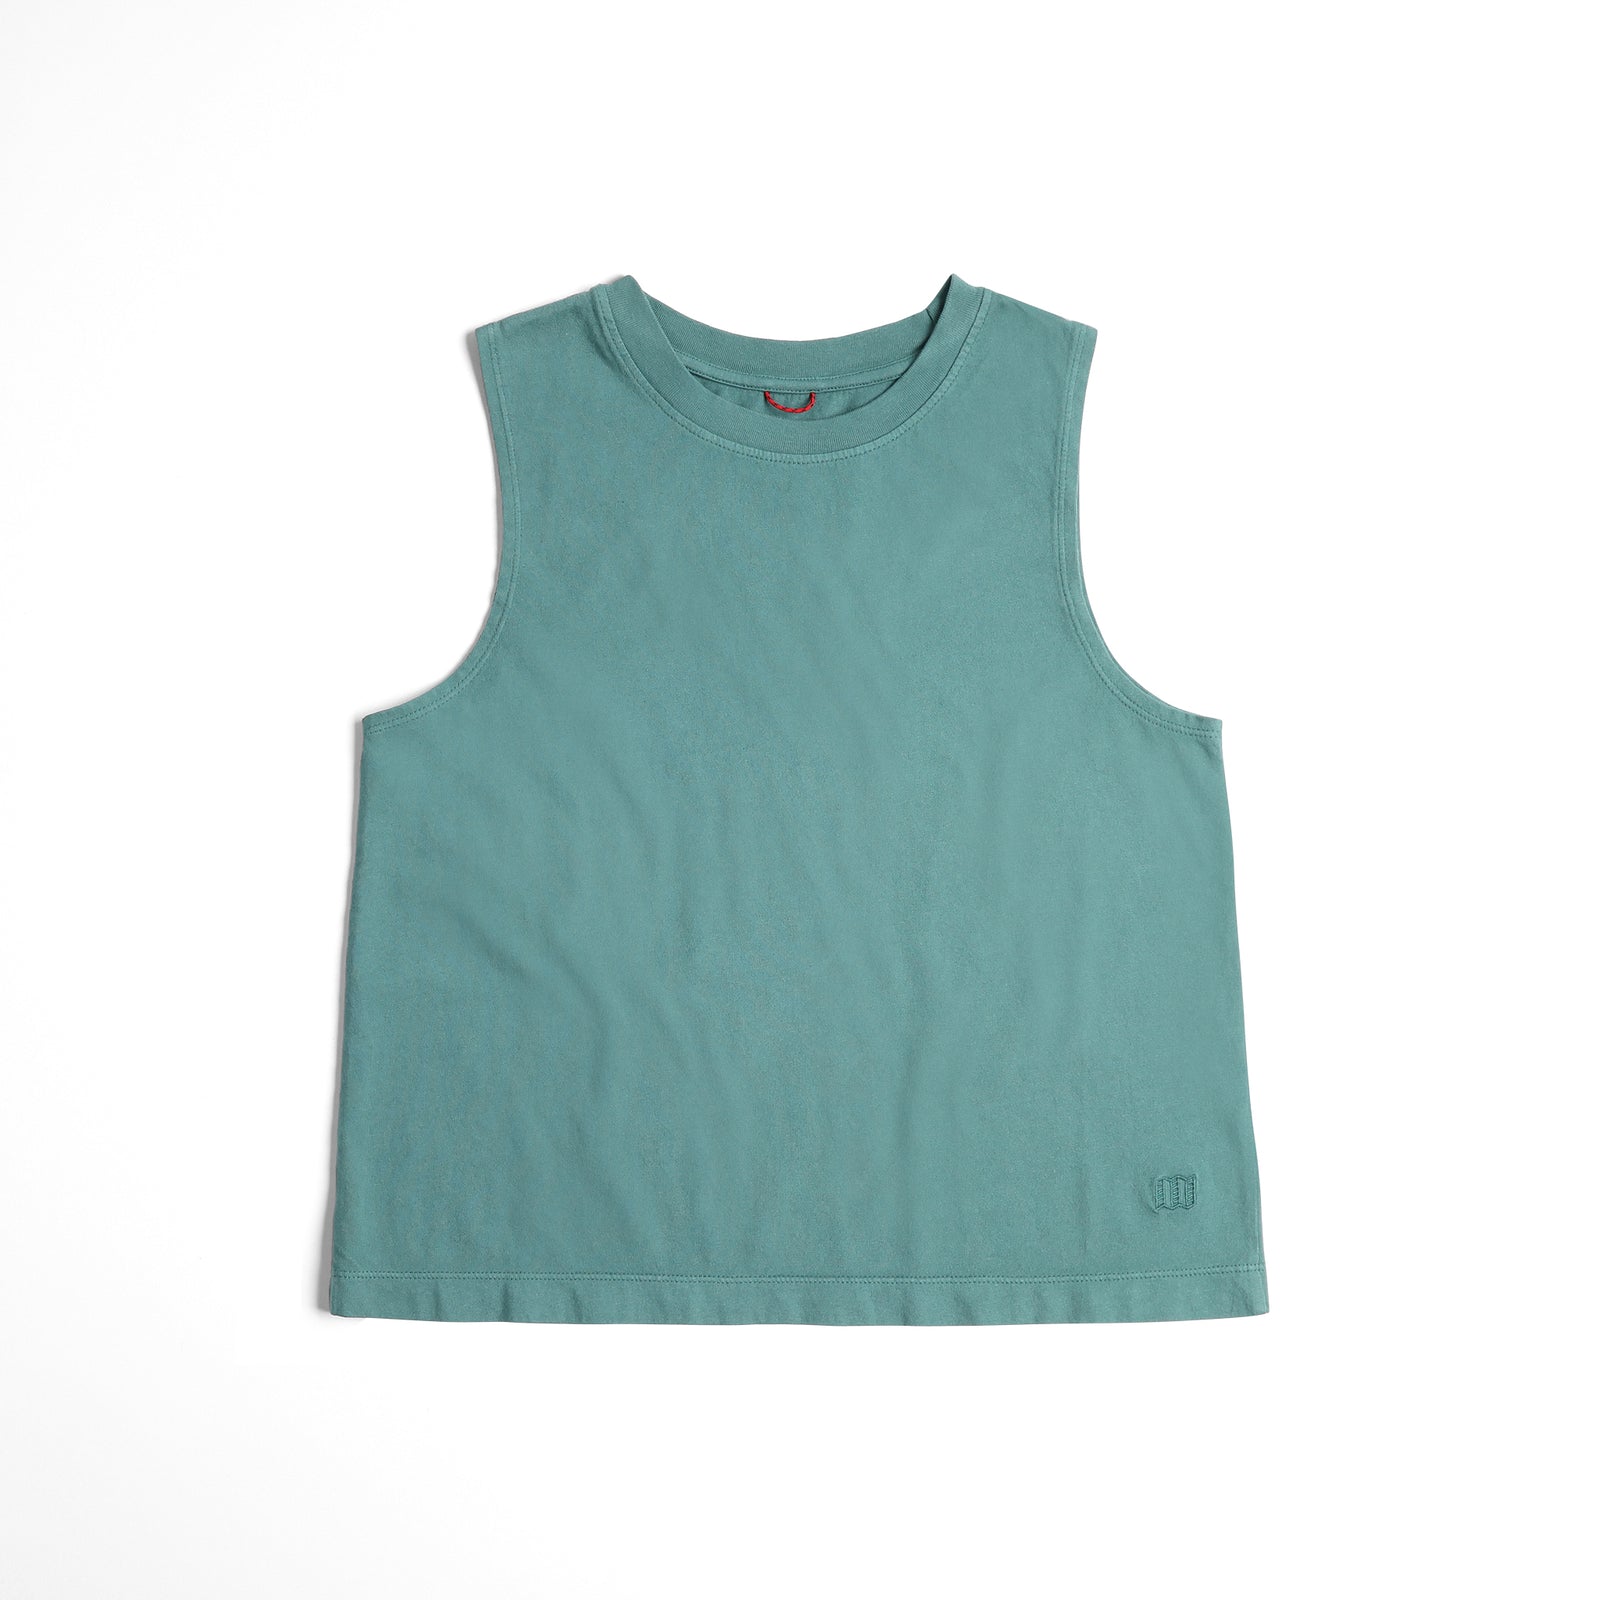 Front View of Topo Designs Dirt Tank - Women's in "Sea Pine"